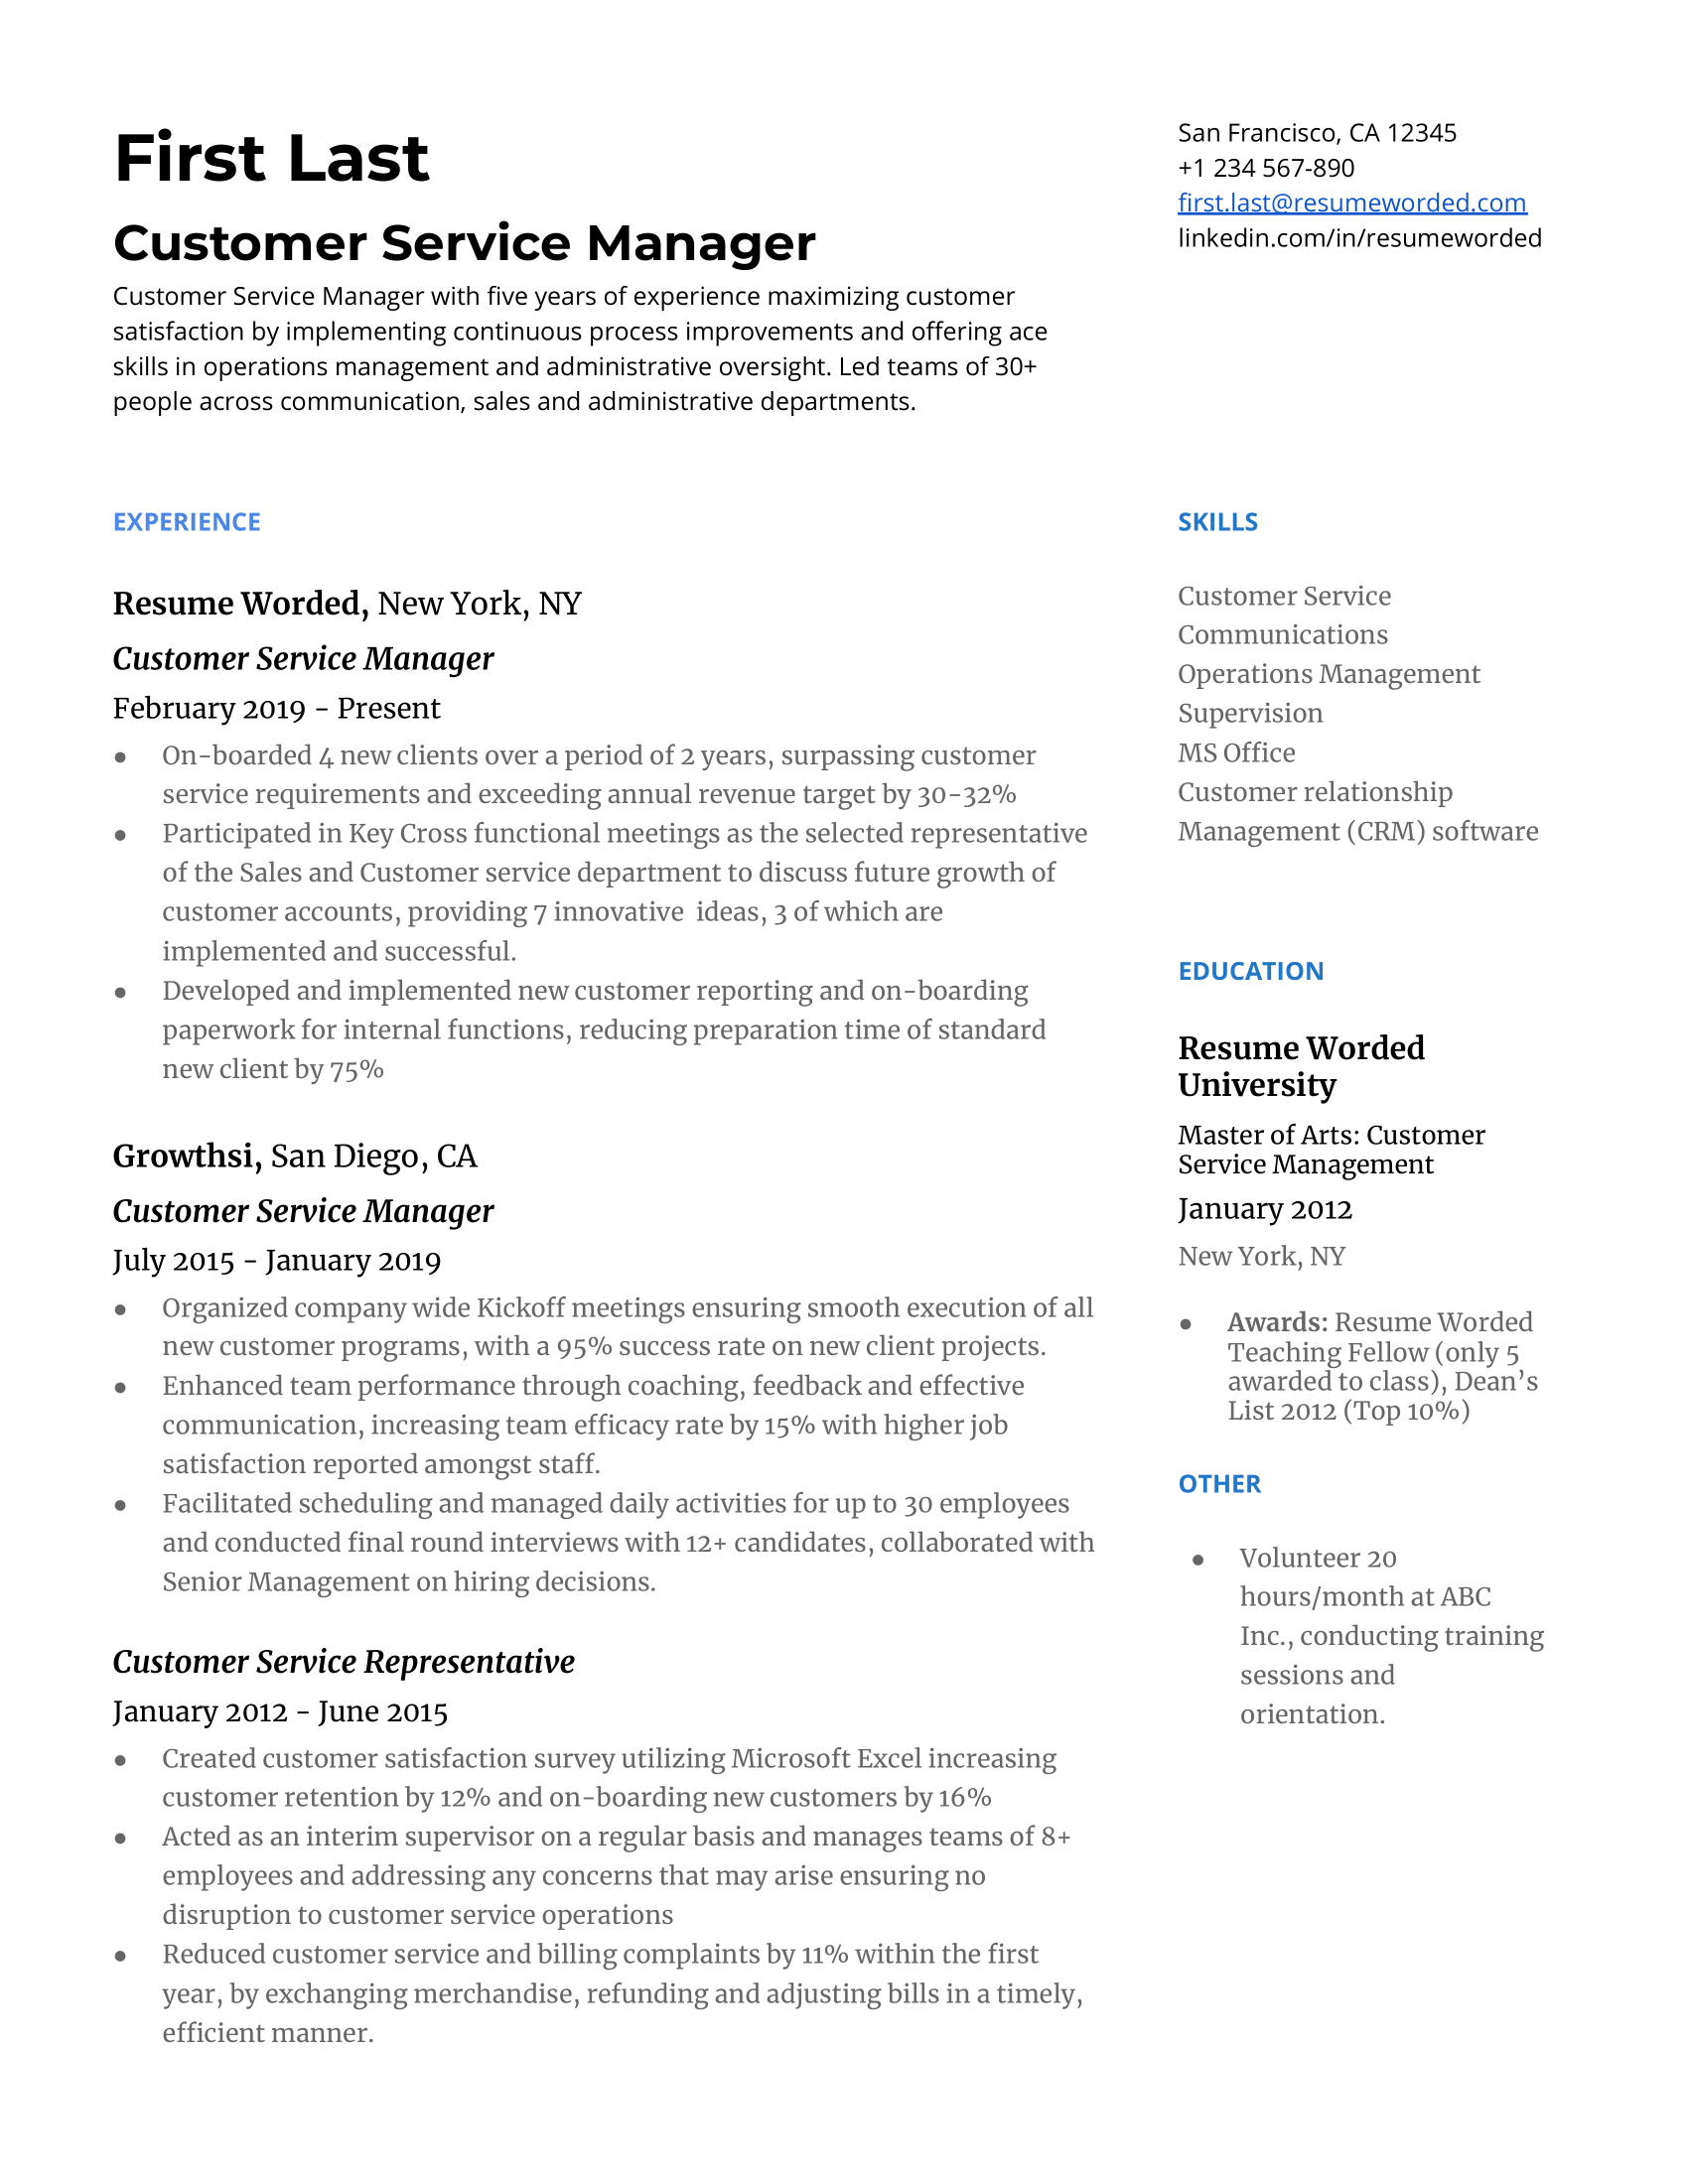 Customer Service Manager Resume Template + Example